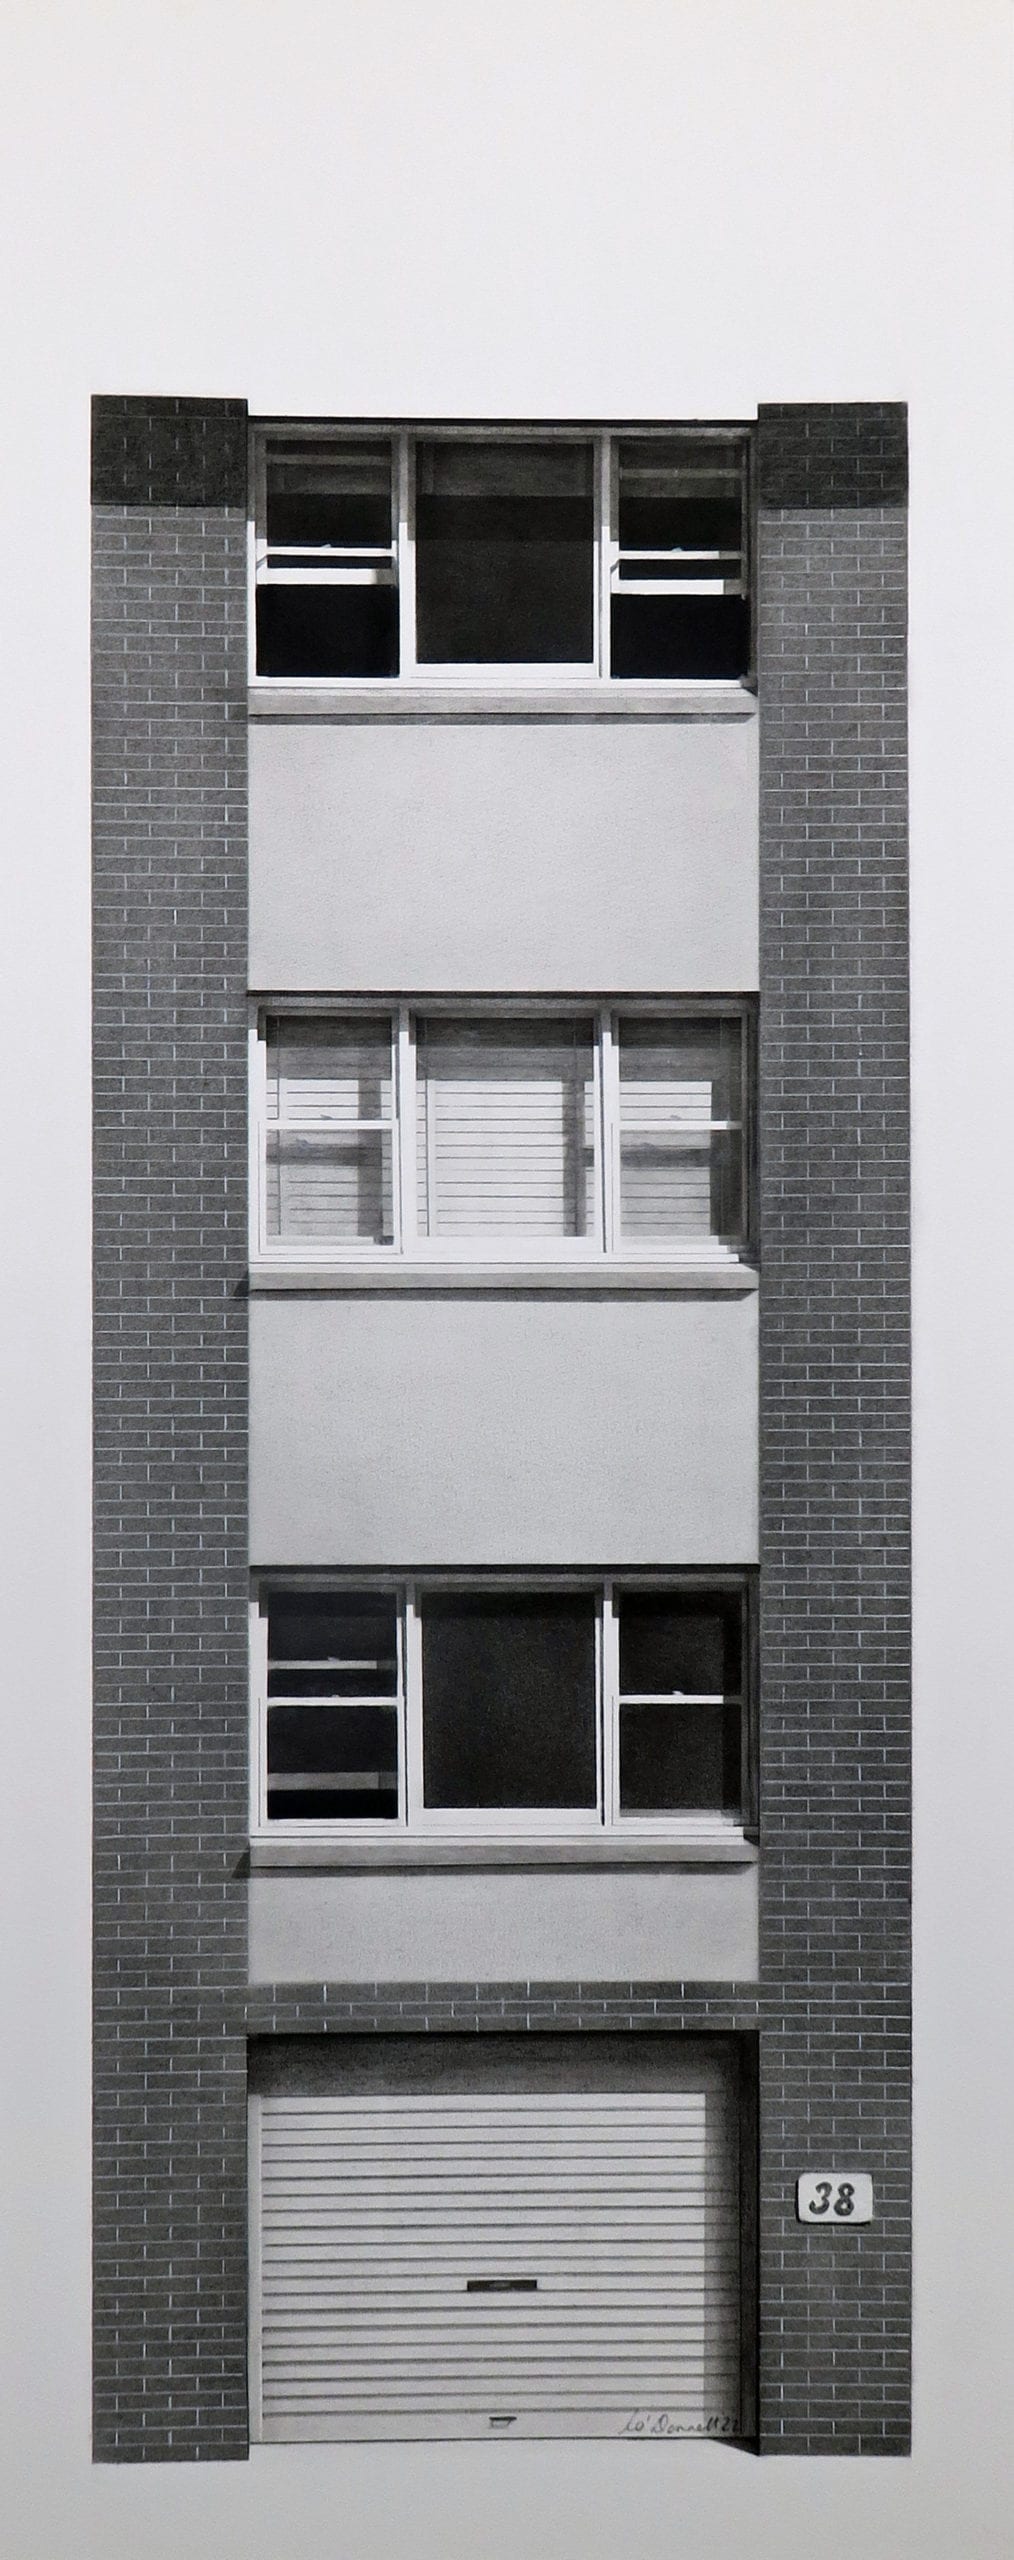 'Unit #38', 2022, charcoal and graphite on paper, 82 x 35cm, framed